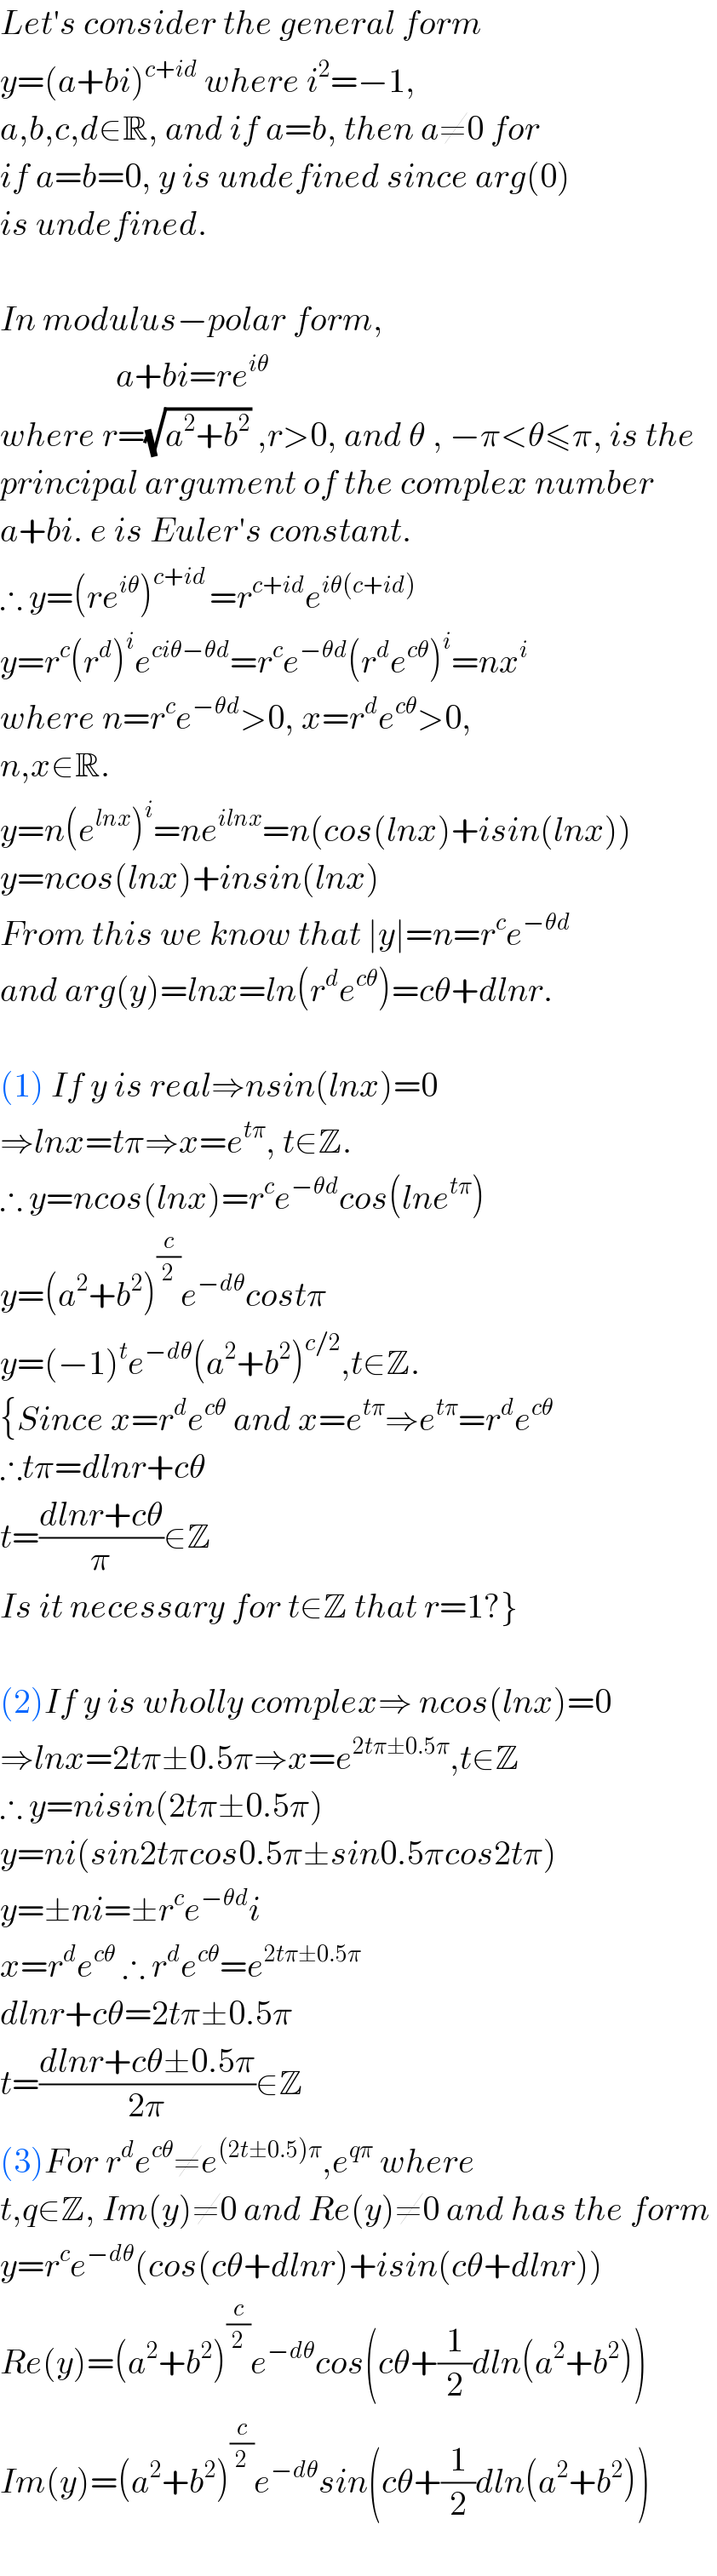 Let′s consider the general form   y=(a+bi)^(c+id)  where i^2 =−1,  a,b,c,d∈R, and if a=b, then a≠0 for  if a=b=0, y is undefined since arg(0)  is undefined.     In modulus−polar form,                   a+bi=re^(iθ)   where r=(√(a^2 +b^2 )) ,r>0, and θ , −π<θ≤π, is the   principal argument of the complex number  a+bi. e is Euler′s constant.  ∴ y=(re^(iθ) )^(c+id ) =r^(c+id) e^(iθ(c+id))   y=r^c (r^d )^i e^(ciθ−θd) =r^c e^(−θd) (r^d e^(cθ) )^i =nx^i   where n=r^c e^(−θd) >0, x=r^d e^(cθ) >0,  n,x∈R.  y=n(e^(lnx) )^i =ne^(ilnx) =n(cos(lnx)+isin(lnx))  y=ncos(lnx)+insin(lnx)  From this we know that ∣y∣=n=r^c e^(−θd)   and arg(y)=lnx=ln(r^d e^(cθ) )=cθ+dlnr.    (1) If y is real⇒nsin(lnx)=0  ⇒lnx=tπ⇒x=e^(tπ) , t∈Z.   ∴ y=ncos(lnx)=r^c e^(−θd) cos(lne^(tπ) )  y=(a^2 +b^2 )^(c/2) e^(−dθ) costπ  y=(−1)^t e^(−dθ) (a^2 +b^2 )^(c/2) ,t∈Z.  {Since x=r^d e^(cθ)  and x=e^(tπ) ⇒e^(tπ) =r^d e^(cθ)   ∴tπ=dlnr+cθ  t=((dlnr+cθ)/π)∈Z  Is it necessary for t∈Z that r=1?}    (2)If y is wholly complex⇒ ncos(lnx)=0  ⇒lnx=2tπ±0.5π⇒x=e^(2tπ±0.5π) ,t∈Z  ∴ y=nisin(2tπ±0.5π)  y=ni(sin2tπcos0.5π±sin0.5πcos2tπ)  y=±ni=±r^c e^(−θd) i  x=r^d e^(cθ)  ∴ r^d e^(cθ) =e^(2tπ±0.5π)   dlnr+cθ=2tπ±0.5π  t=((dlnr+cθ±0.5π)/(2π))∈Z  (3)For r^d e^(cθ) ≠e^((2t±0.5)π) ,e^(qπ)  where  t,q∈Z, Im(y)≠0 and Re(y)≠0 and has the form   y=r^c e^(−dθ) (cos(cθ+dlnr)+isin(cθ+dlnr))  Re(y)=(a^2 +b^2 )^(c/2) e^(−dθ) cos(cθ+(1/2)dln(a^2 +b^2 ))  Im(y)=(a^2 +b^2 )^(c/2) e^(−dθ) sin(cθ+(1/2)dln(a^2 +b^2 ))    